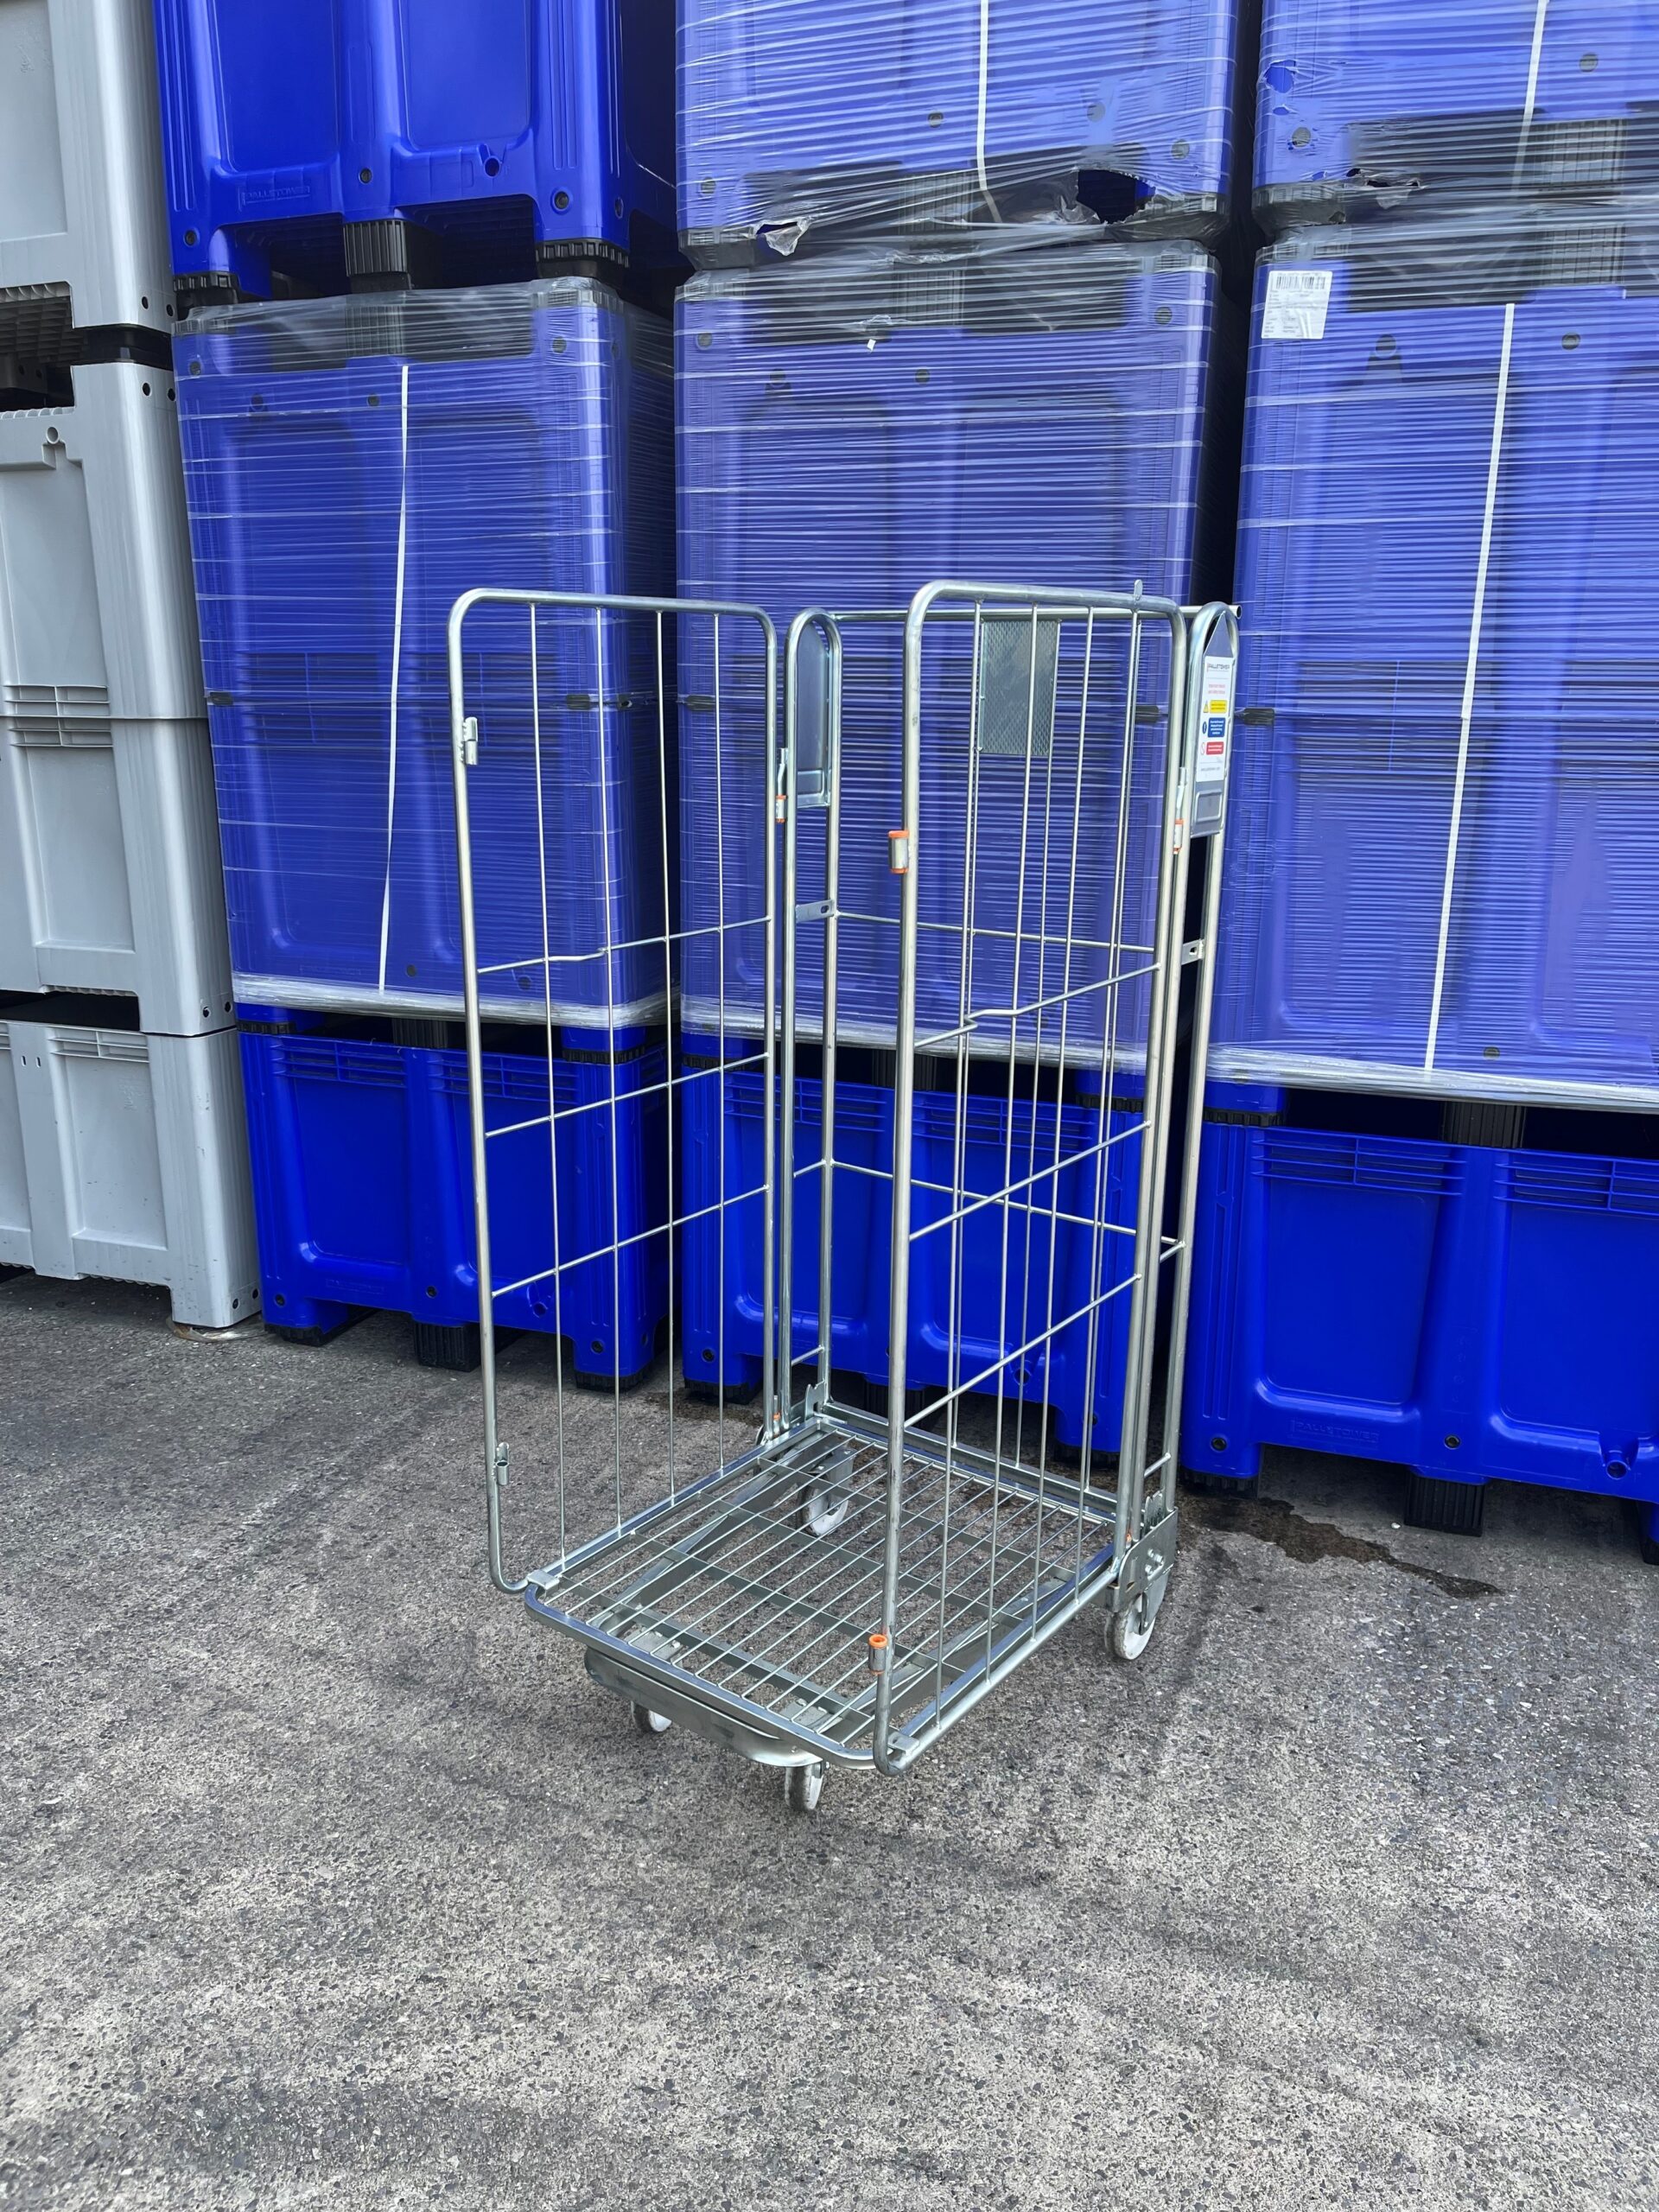 Unbeatable price – used three sided rod roll pallets for £49.95